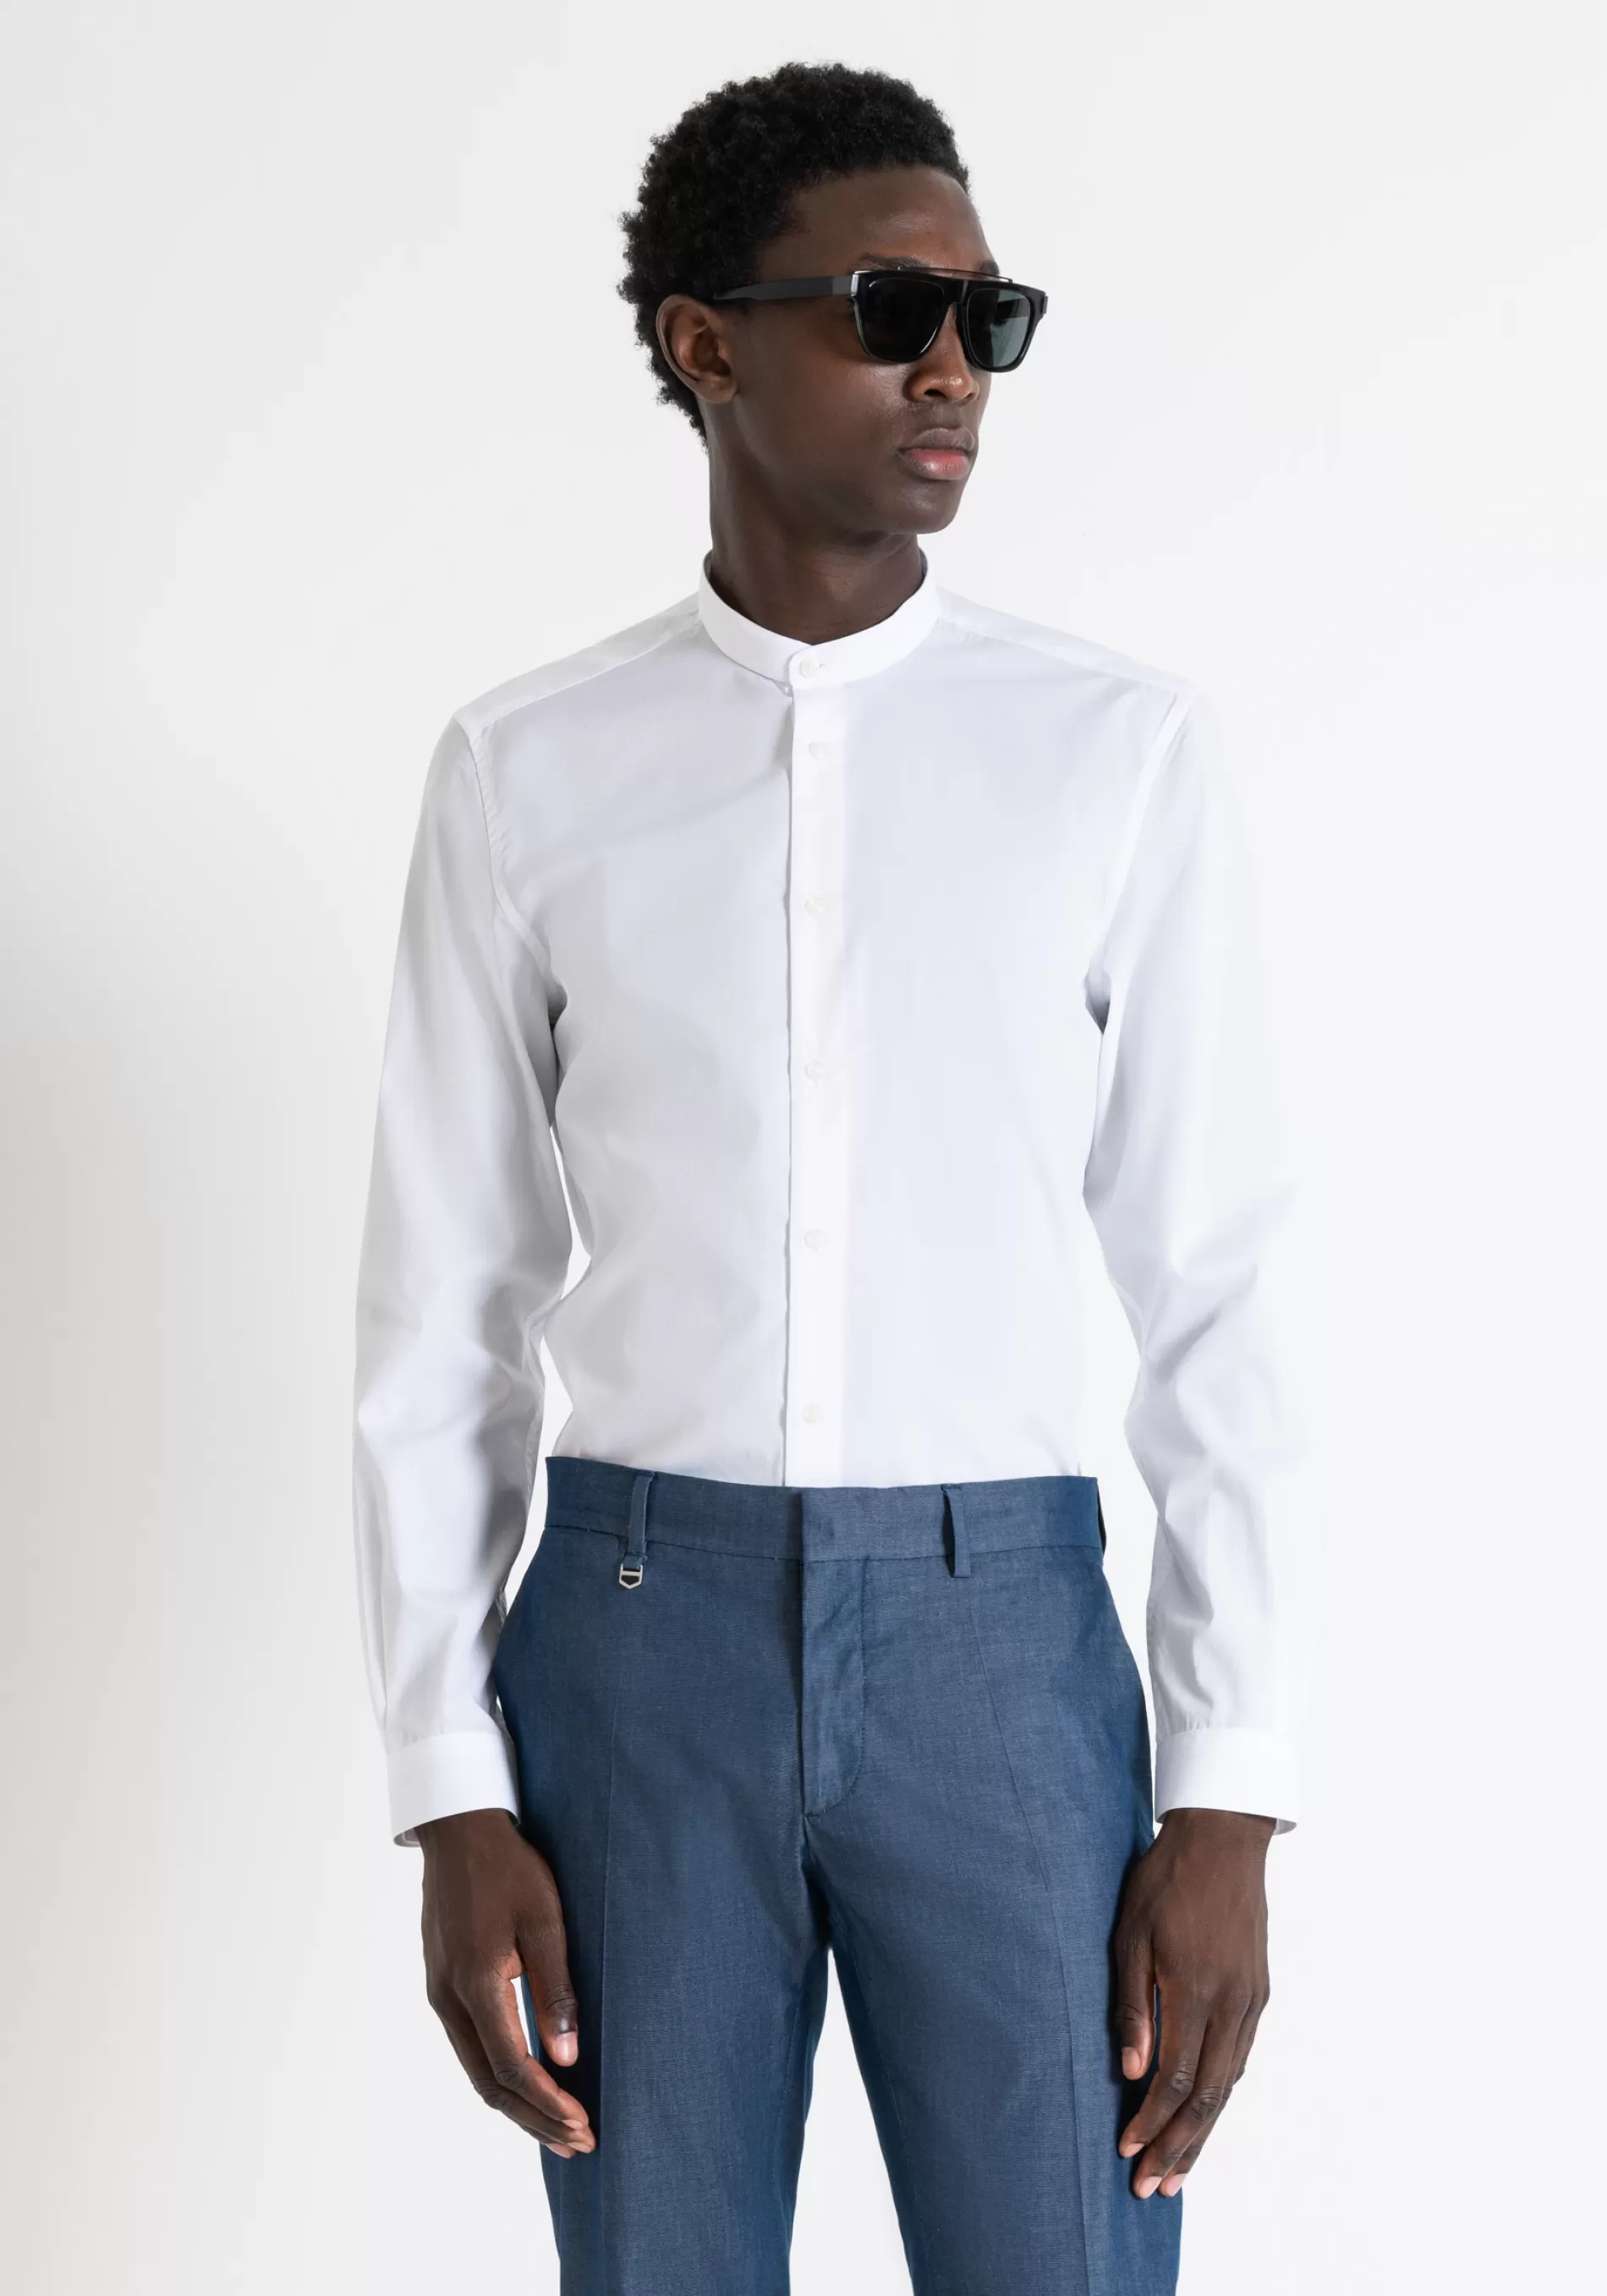 Sale "SEOUL" SLIM FIT SHIRT IN EASY IRON COTTON Shirts